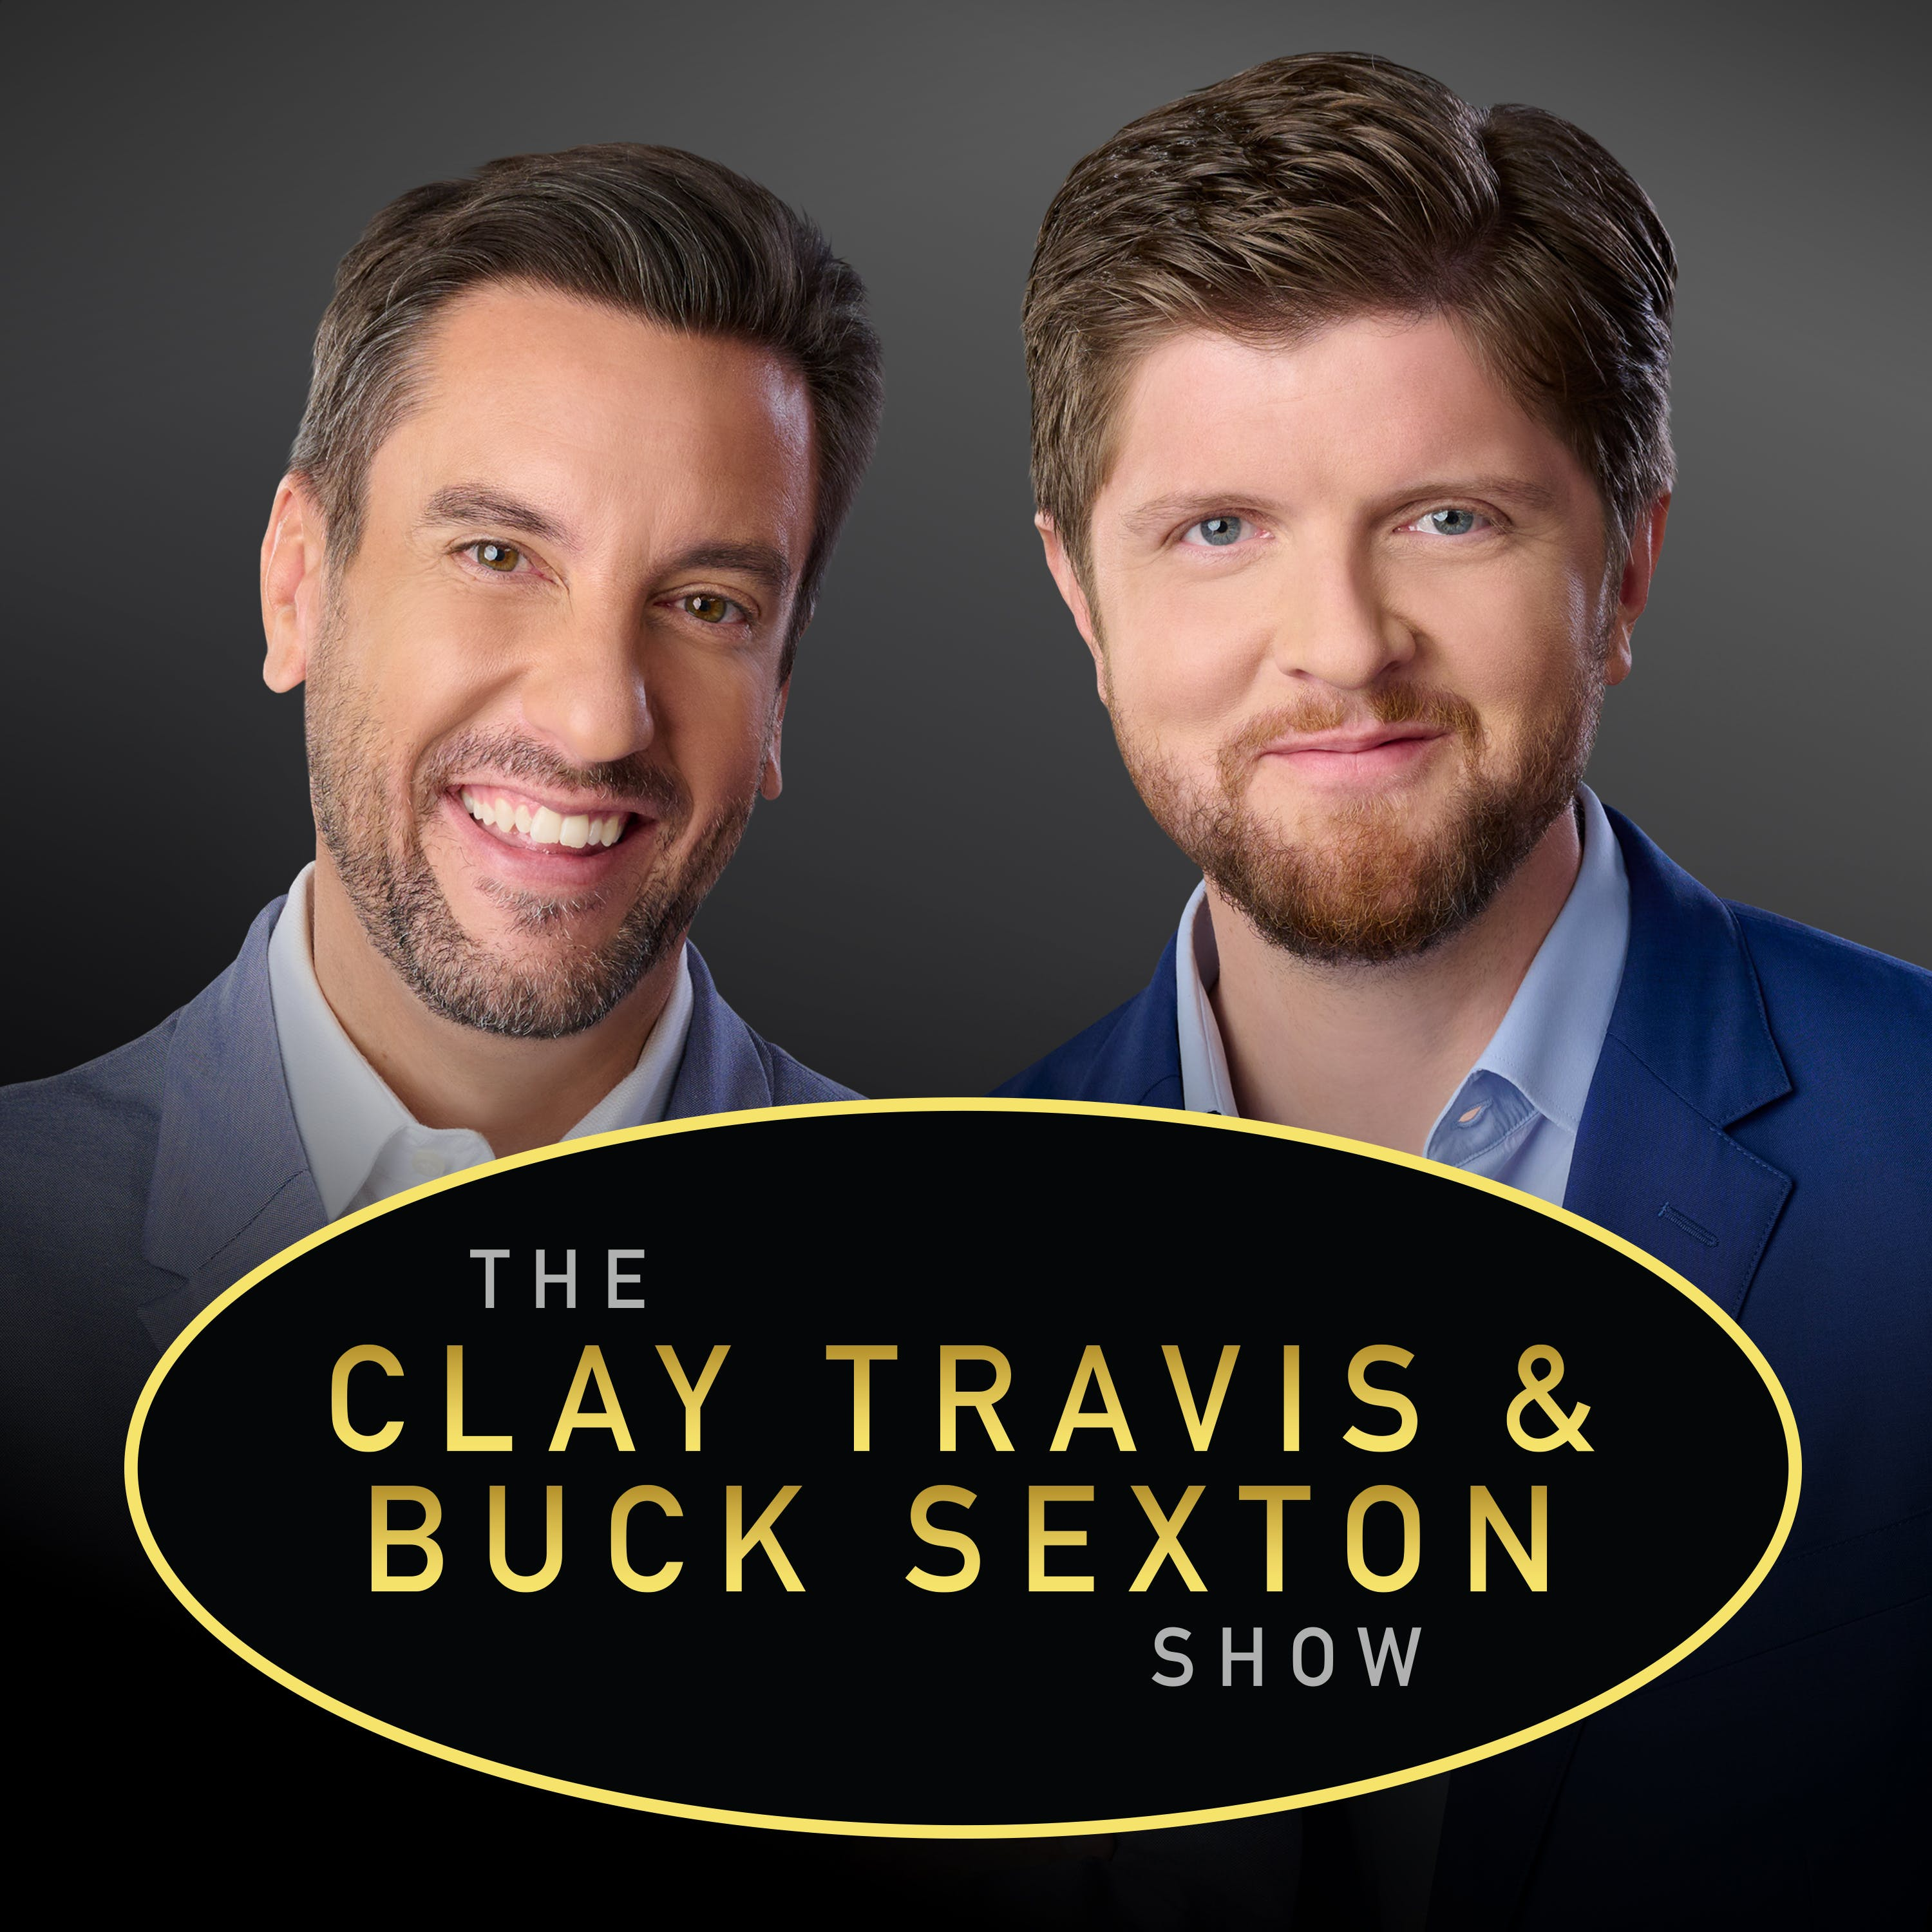 Clay Travis and Buck Sexton Show H1 – Oct 18 2021